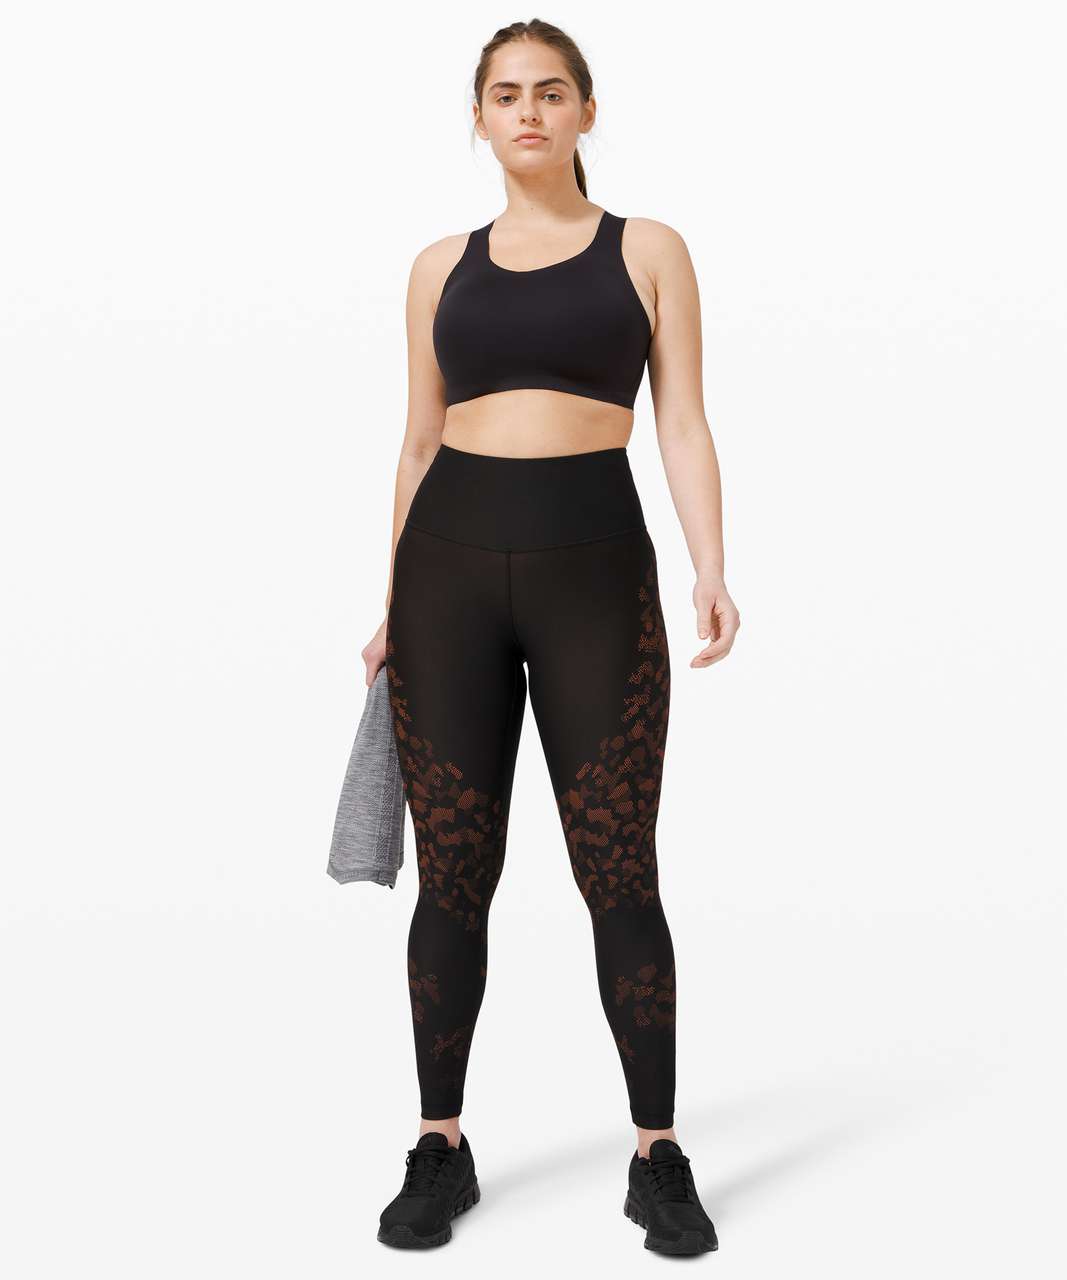 Lululemon Mapped Out High Rise Tight 28 Camo Black / Brick